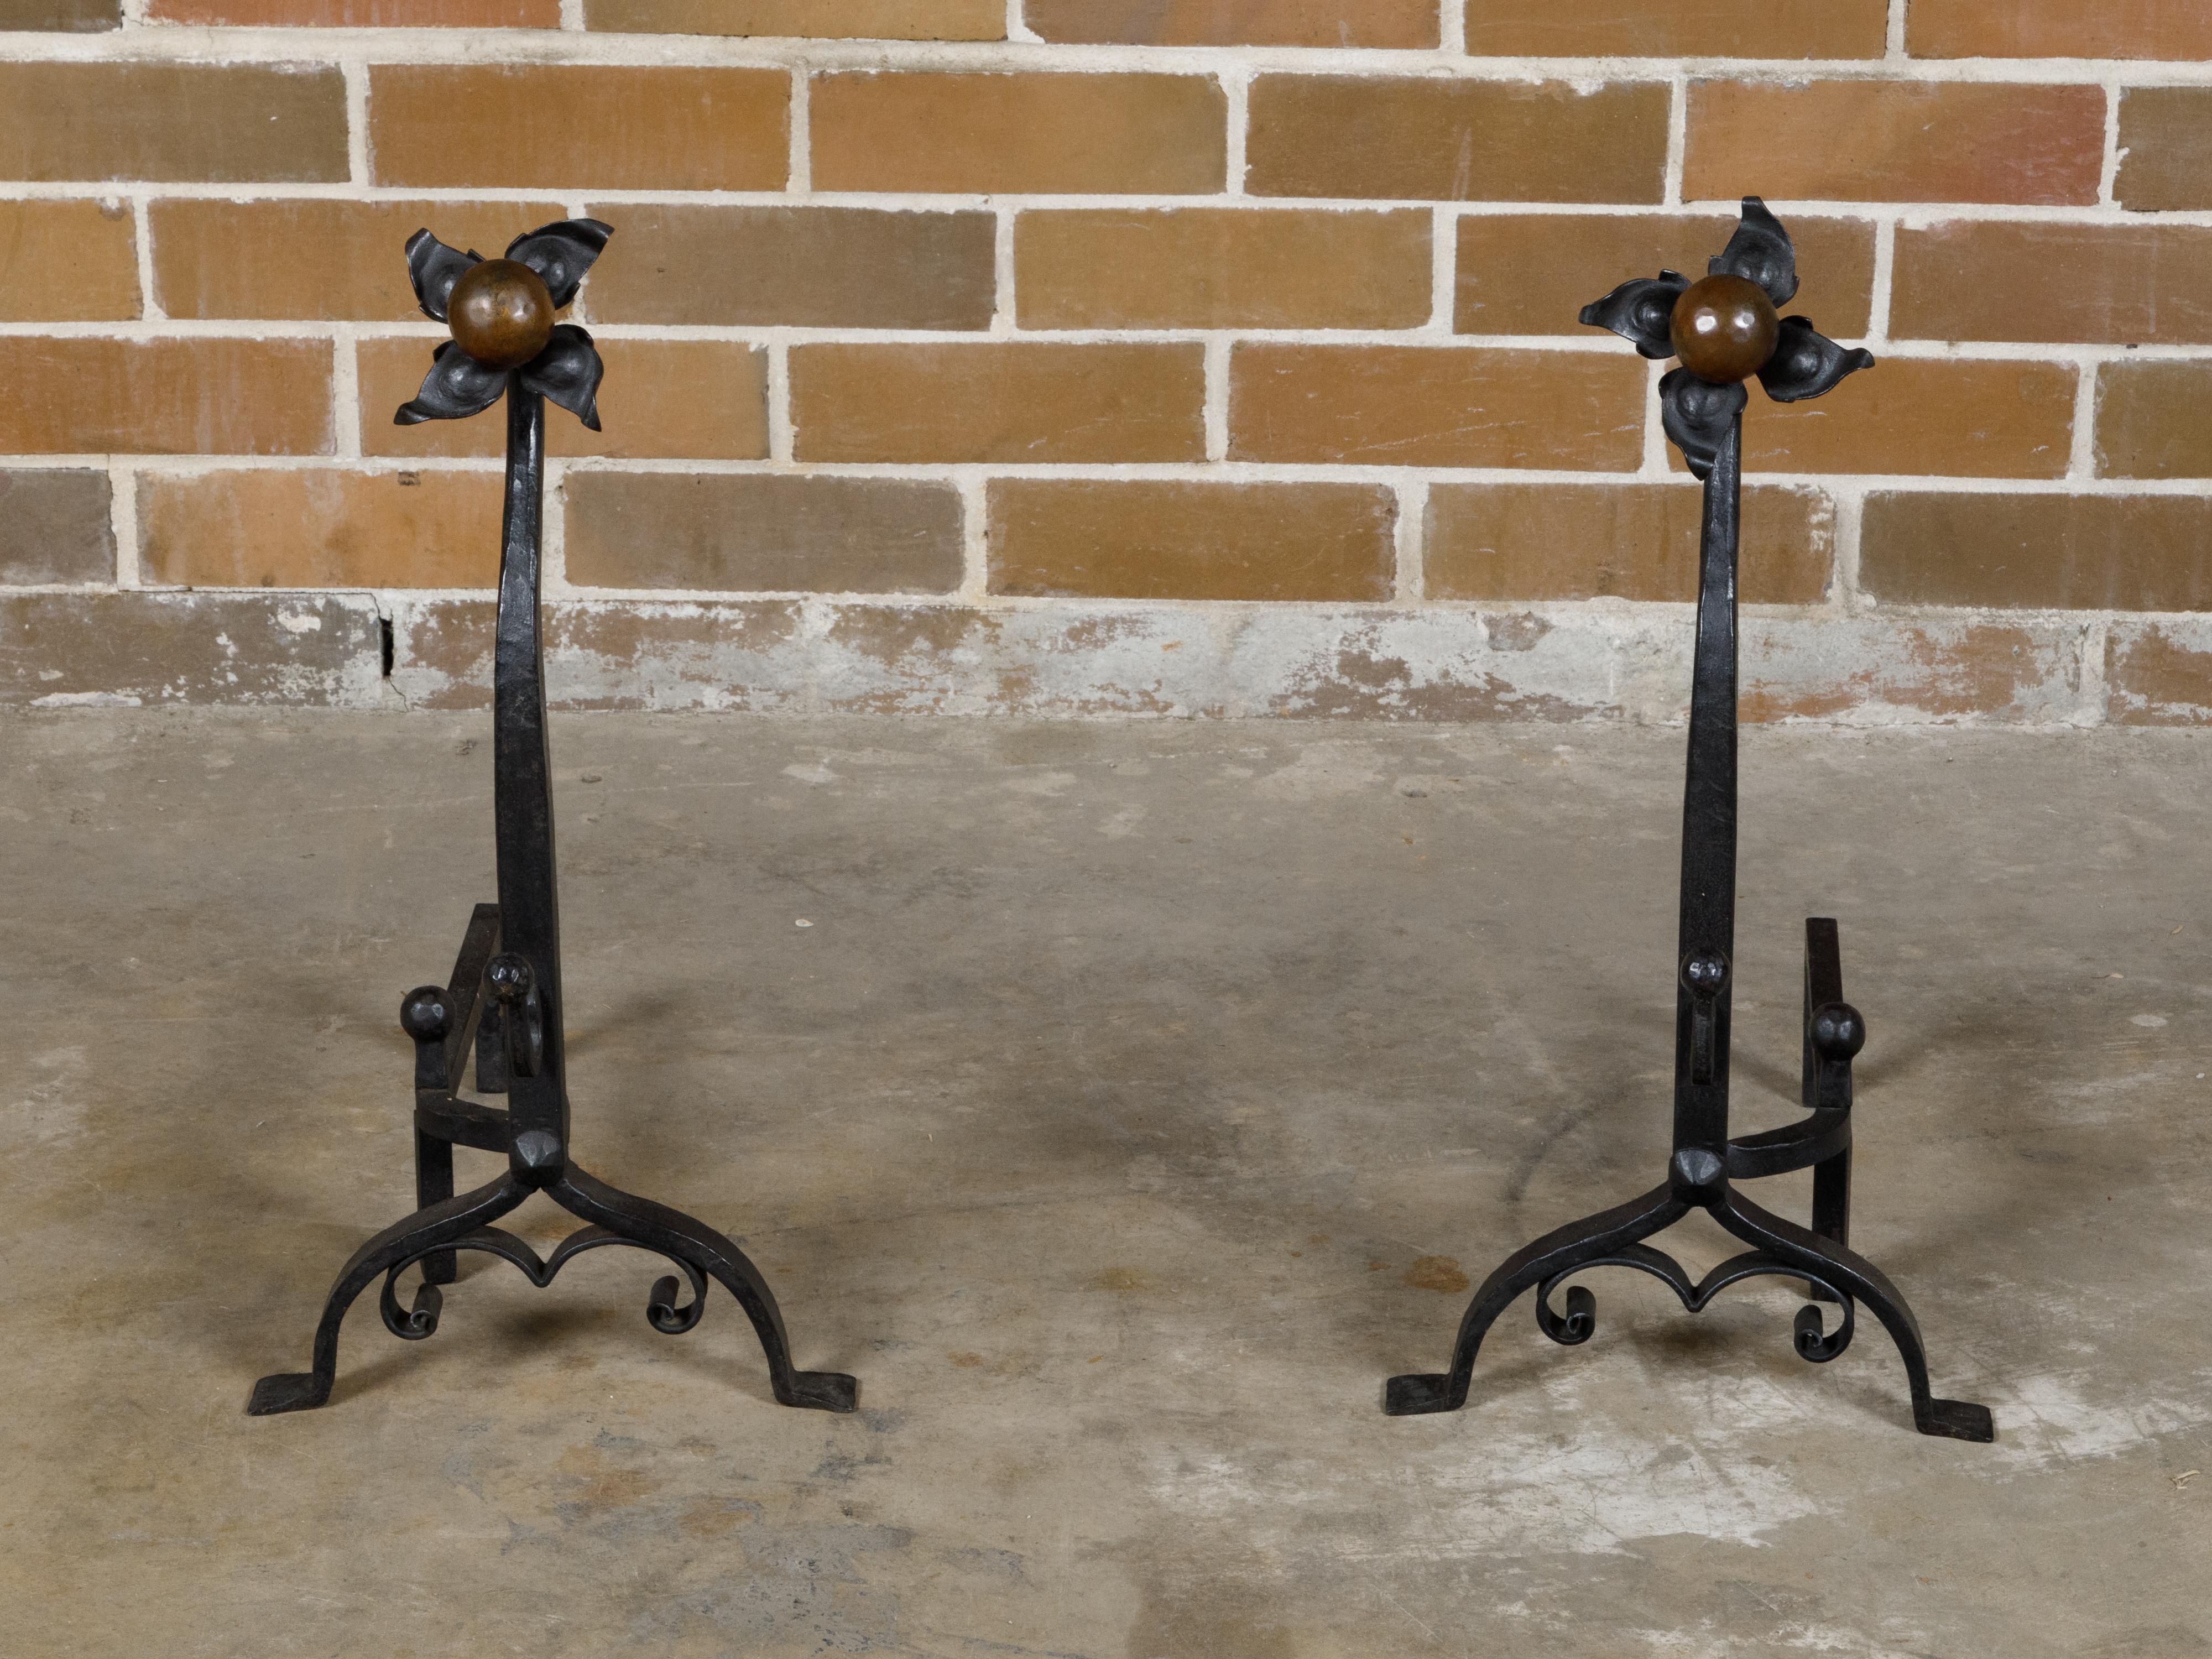 A pair of English Turn of the Century iron and copper andirons from circa 1900 with floral motifs. At the turn of the 20th century, a pair of English andirons emerged, masterfully crafted from iron and adorned with copper detailing, showcasing